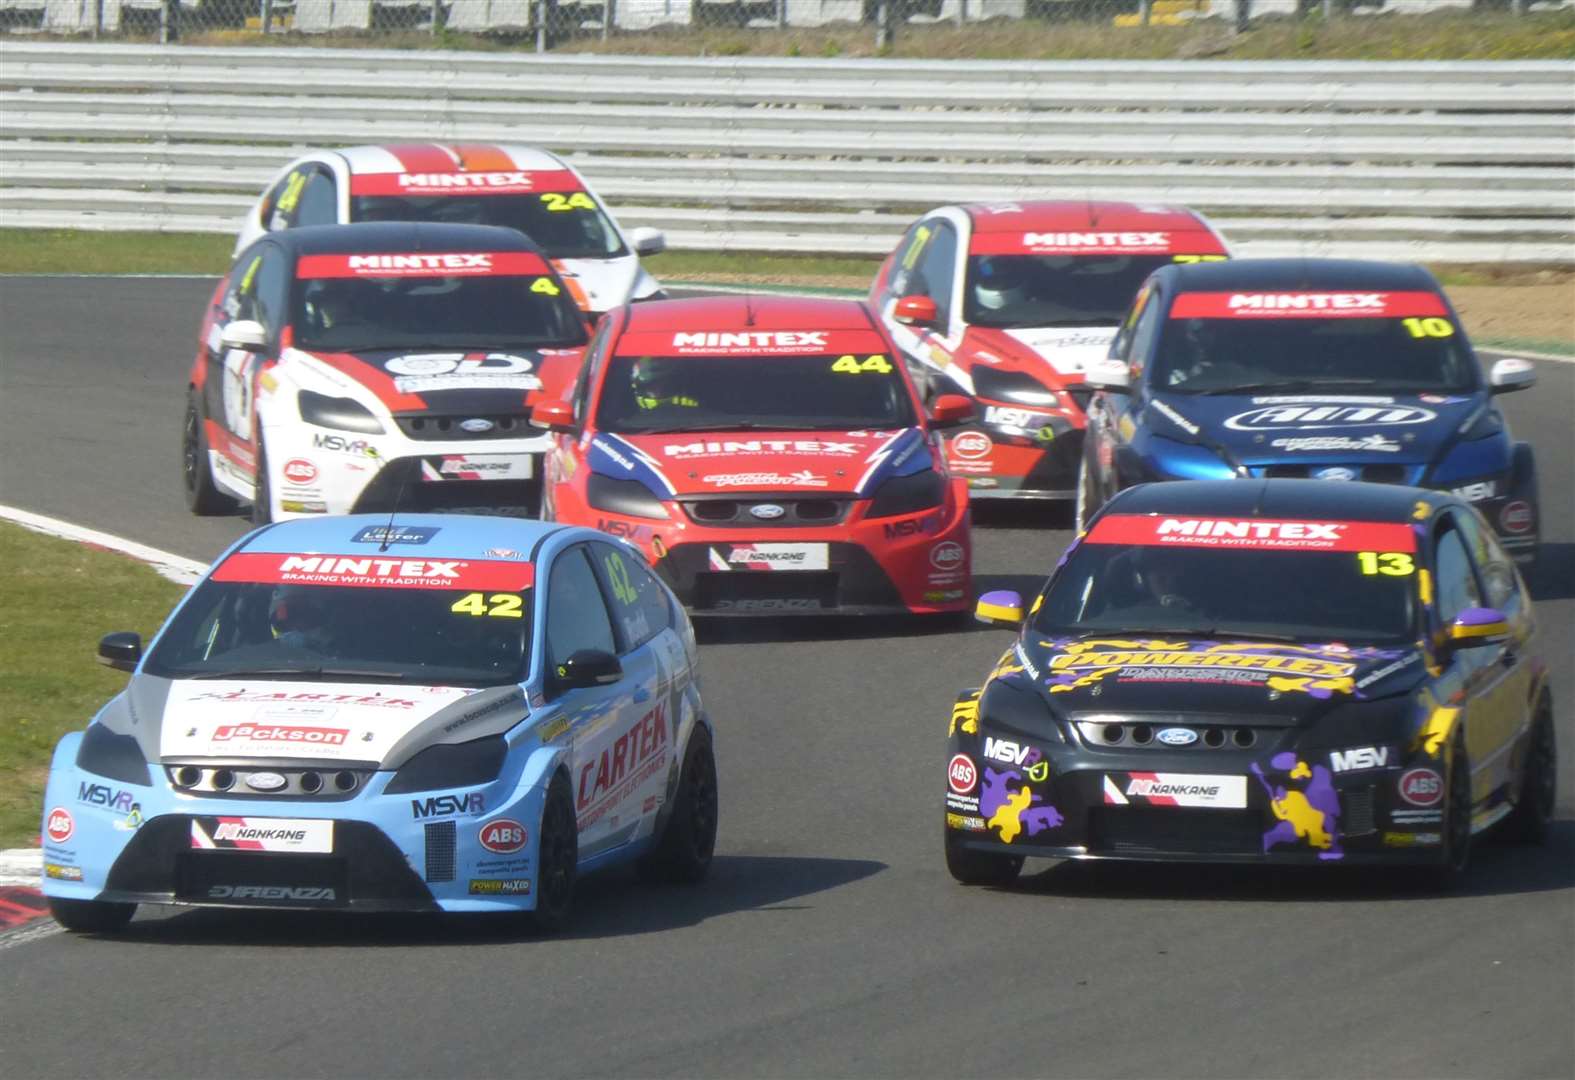 Rudd (42) leads the Focus Cup field at Brands Hatch in September. Picture: Vic Wright